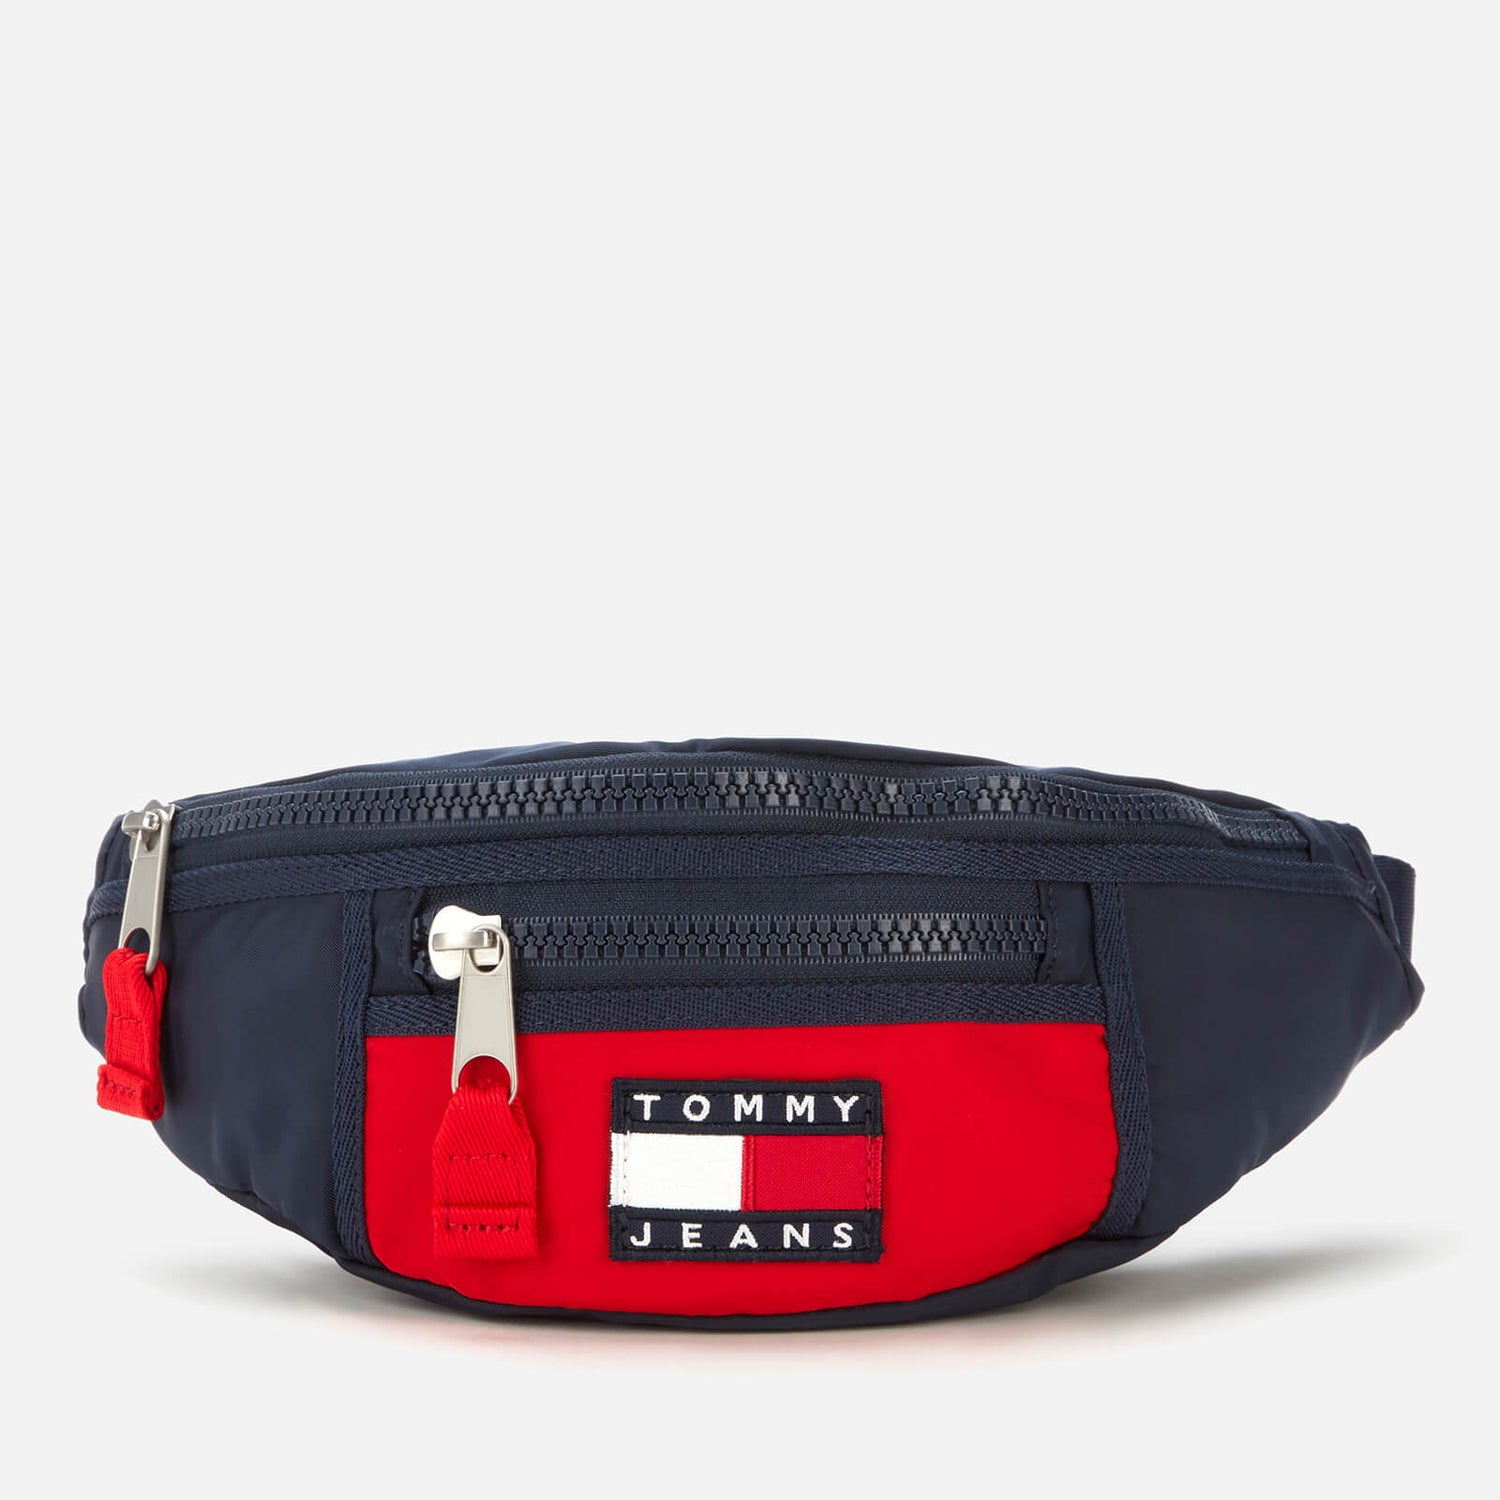 Tommy Jeans Men's Heritage Bumbag Nylon - Corporate